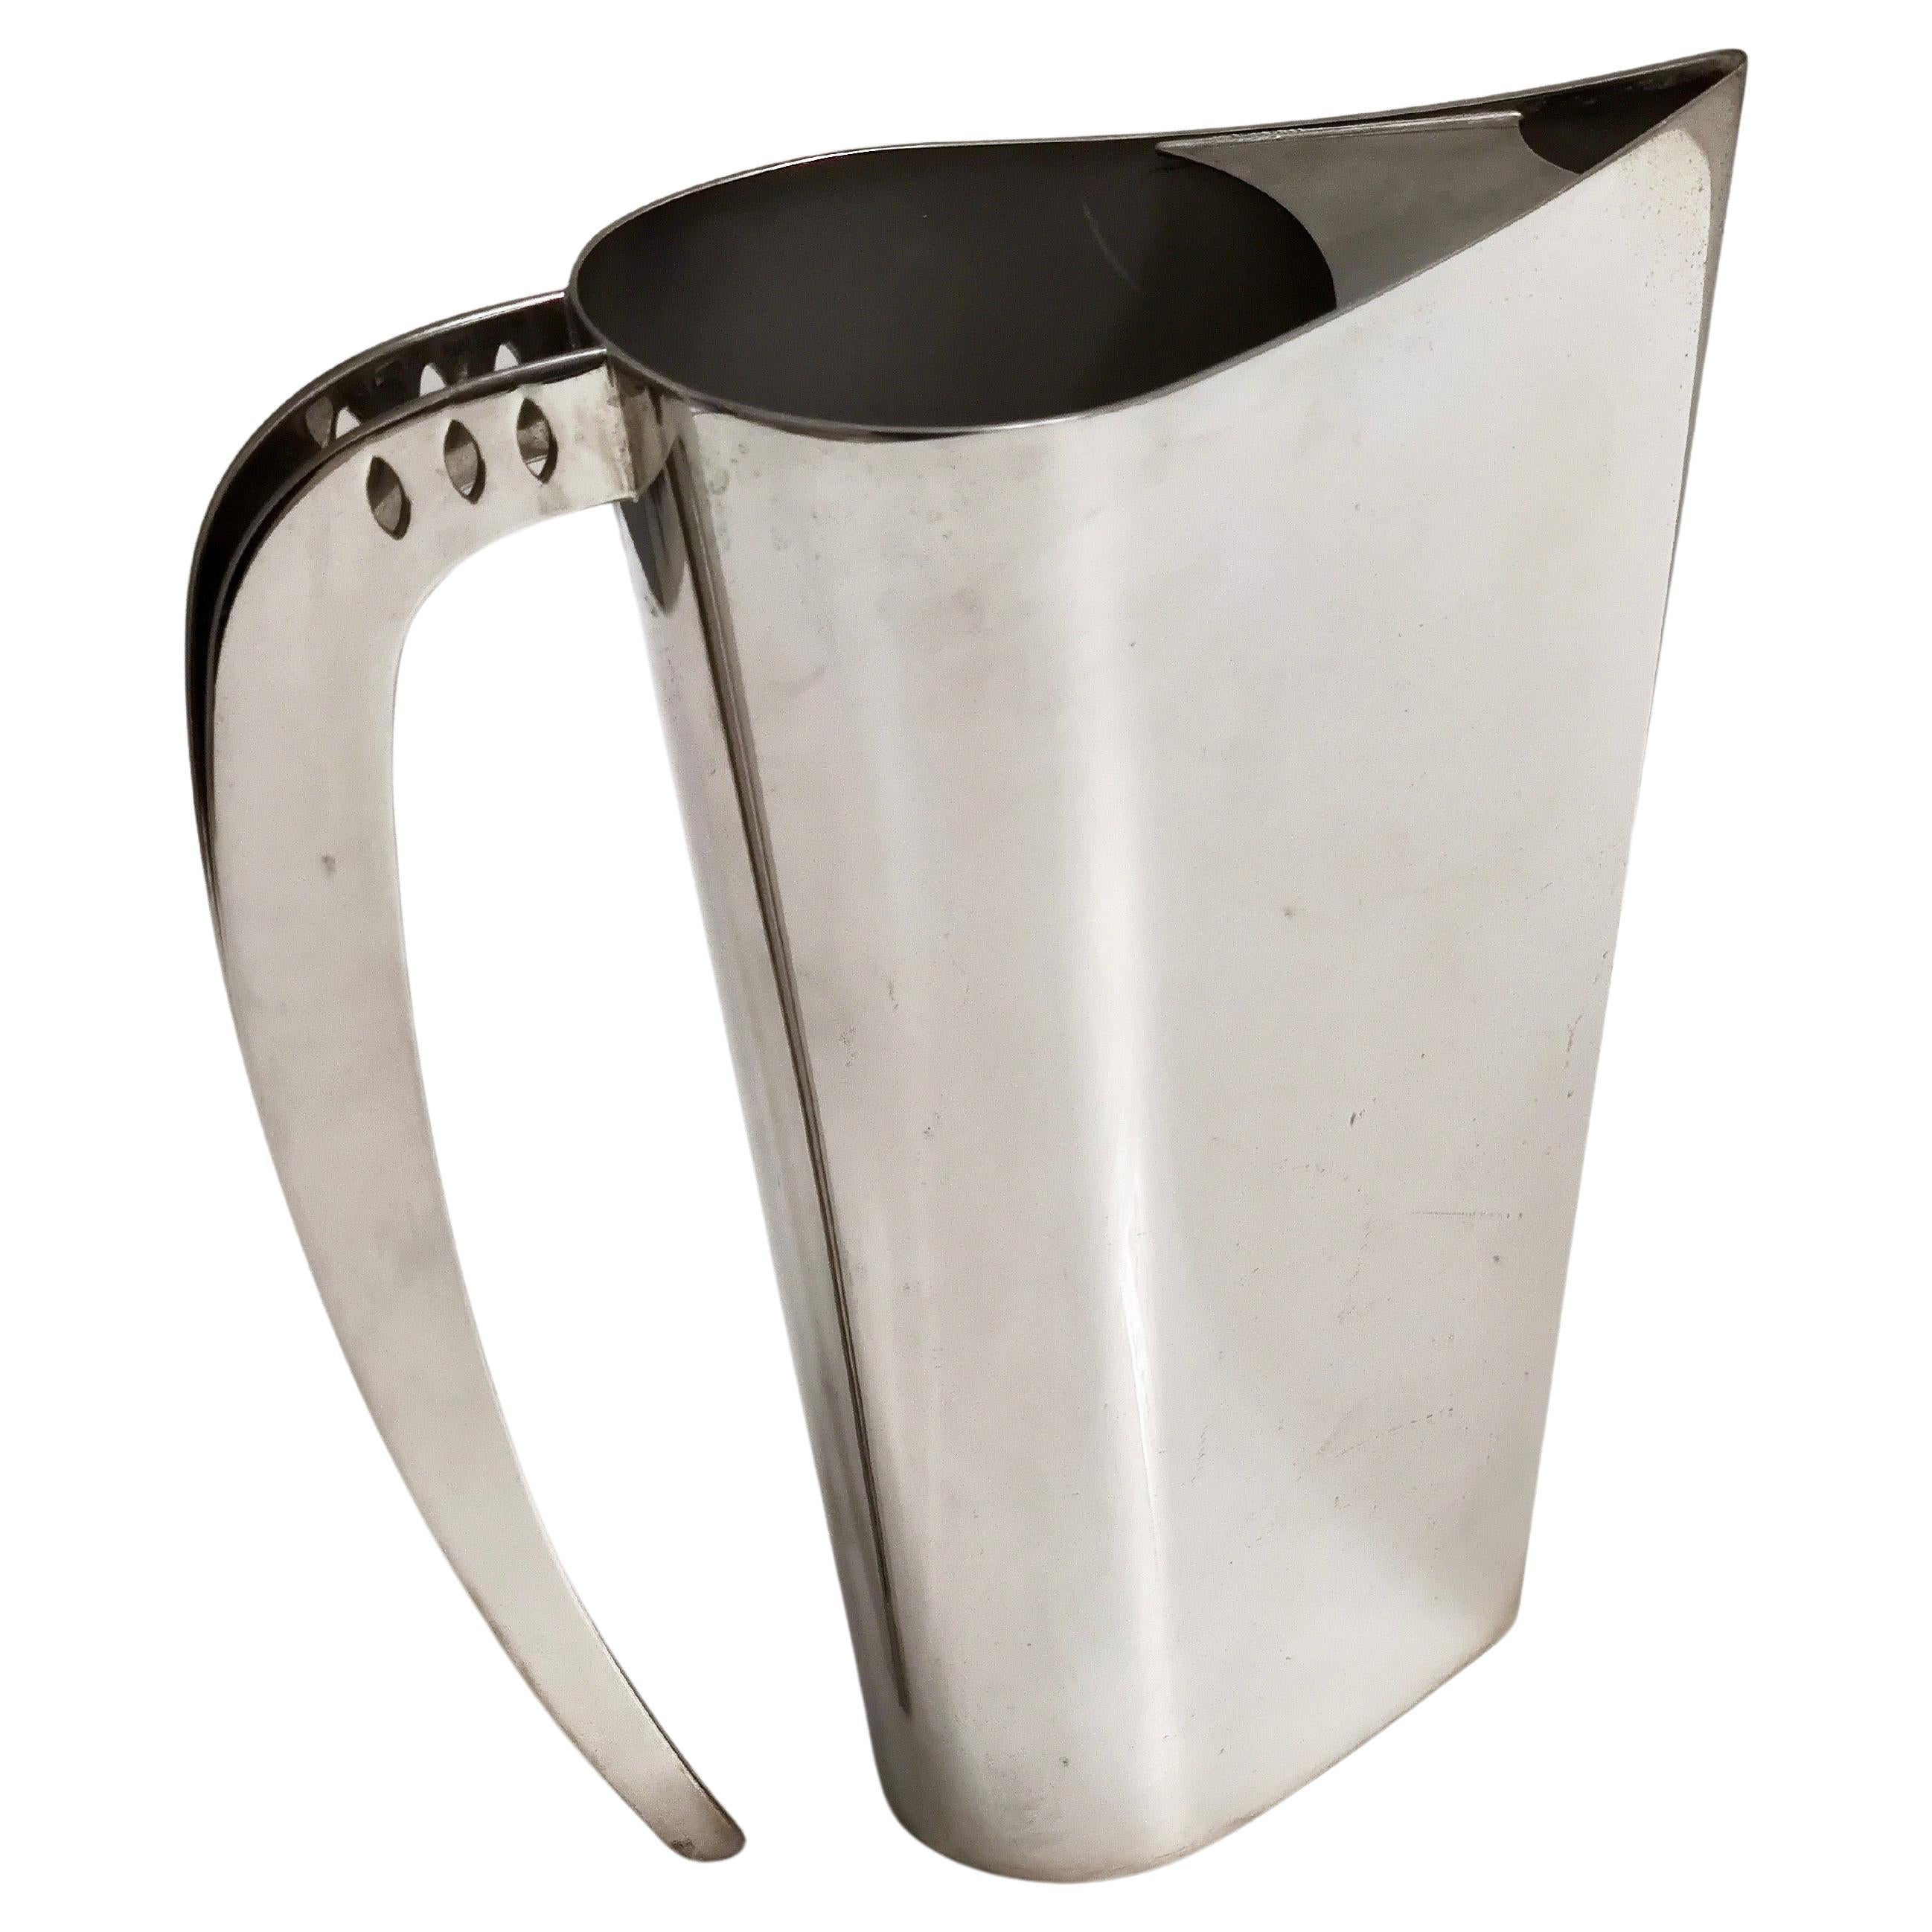 Postmodern Silver Plated Brass Jug "Kanye"by Lino Sabattini, Italy, 1978 - 1981 For Sale